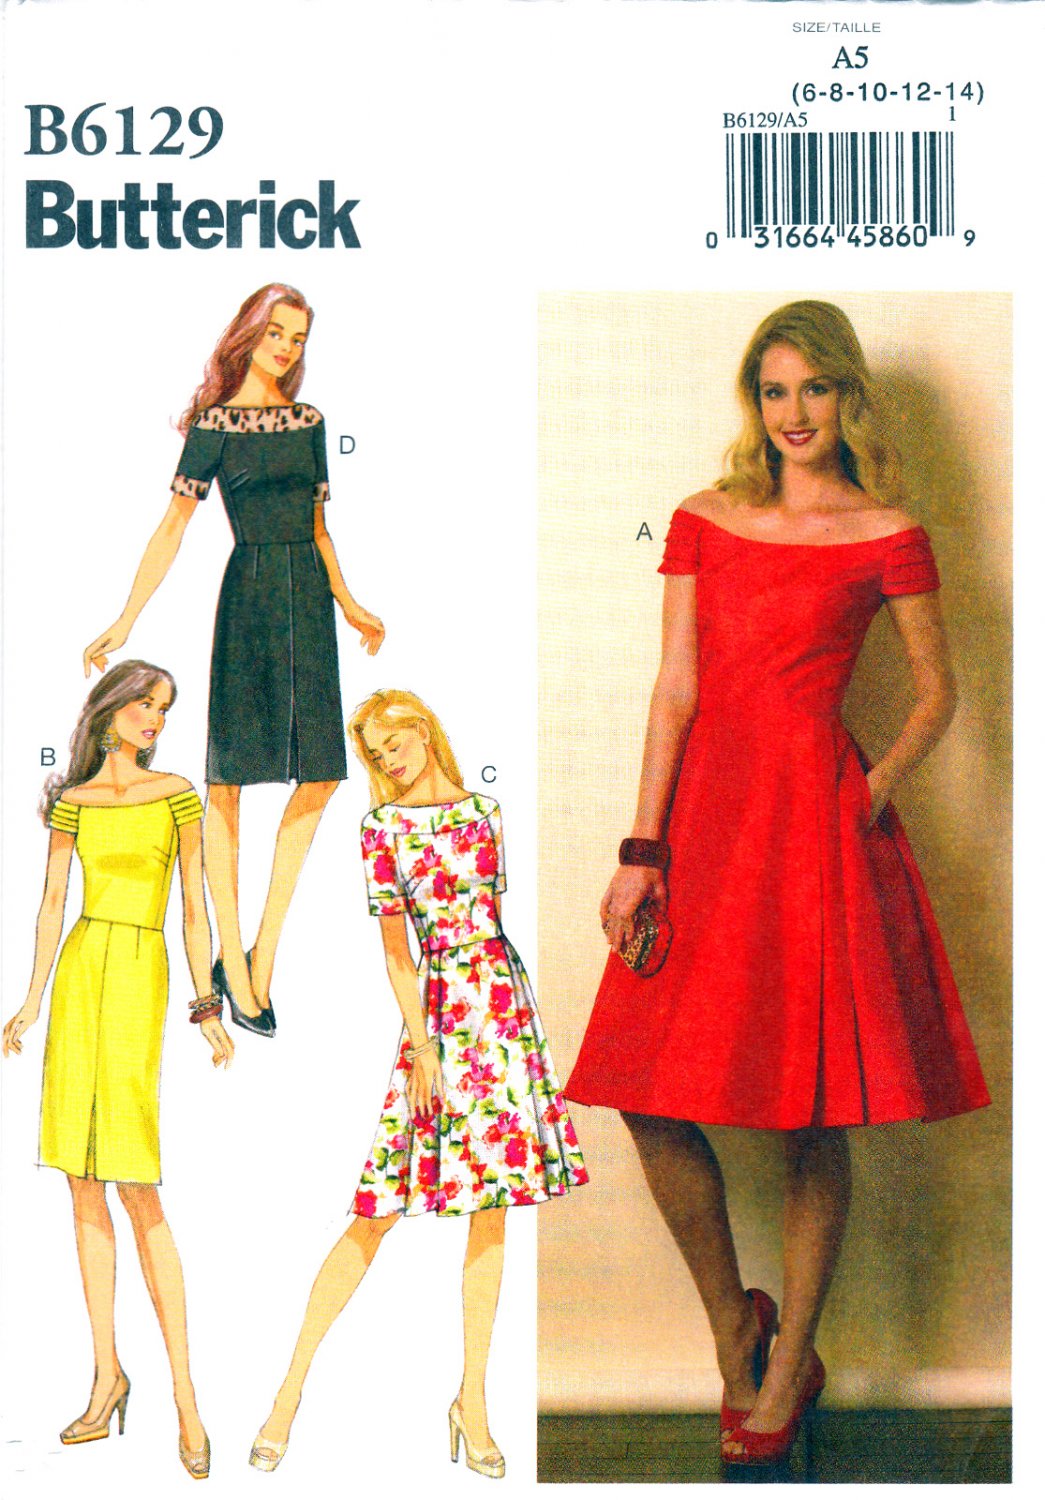 Butterick B6129 6129 Misses Petite Dresses Lined Bodice Sewing Pattern Sizes 6-8-10-12-14